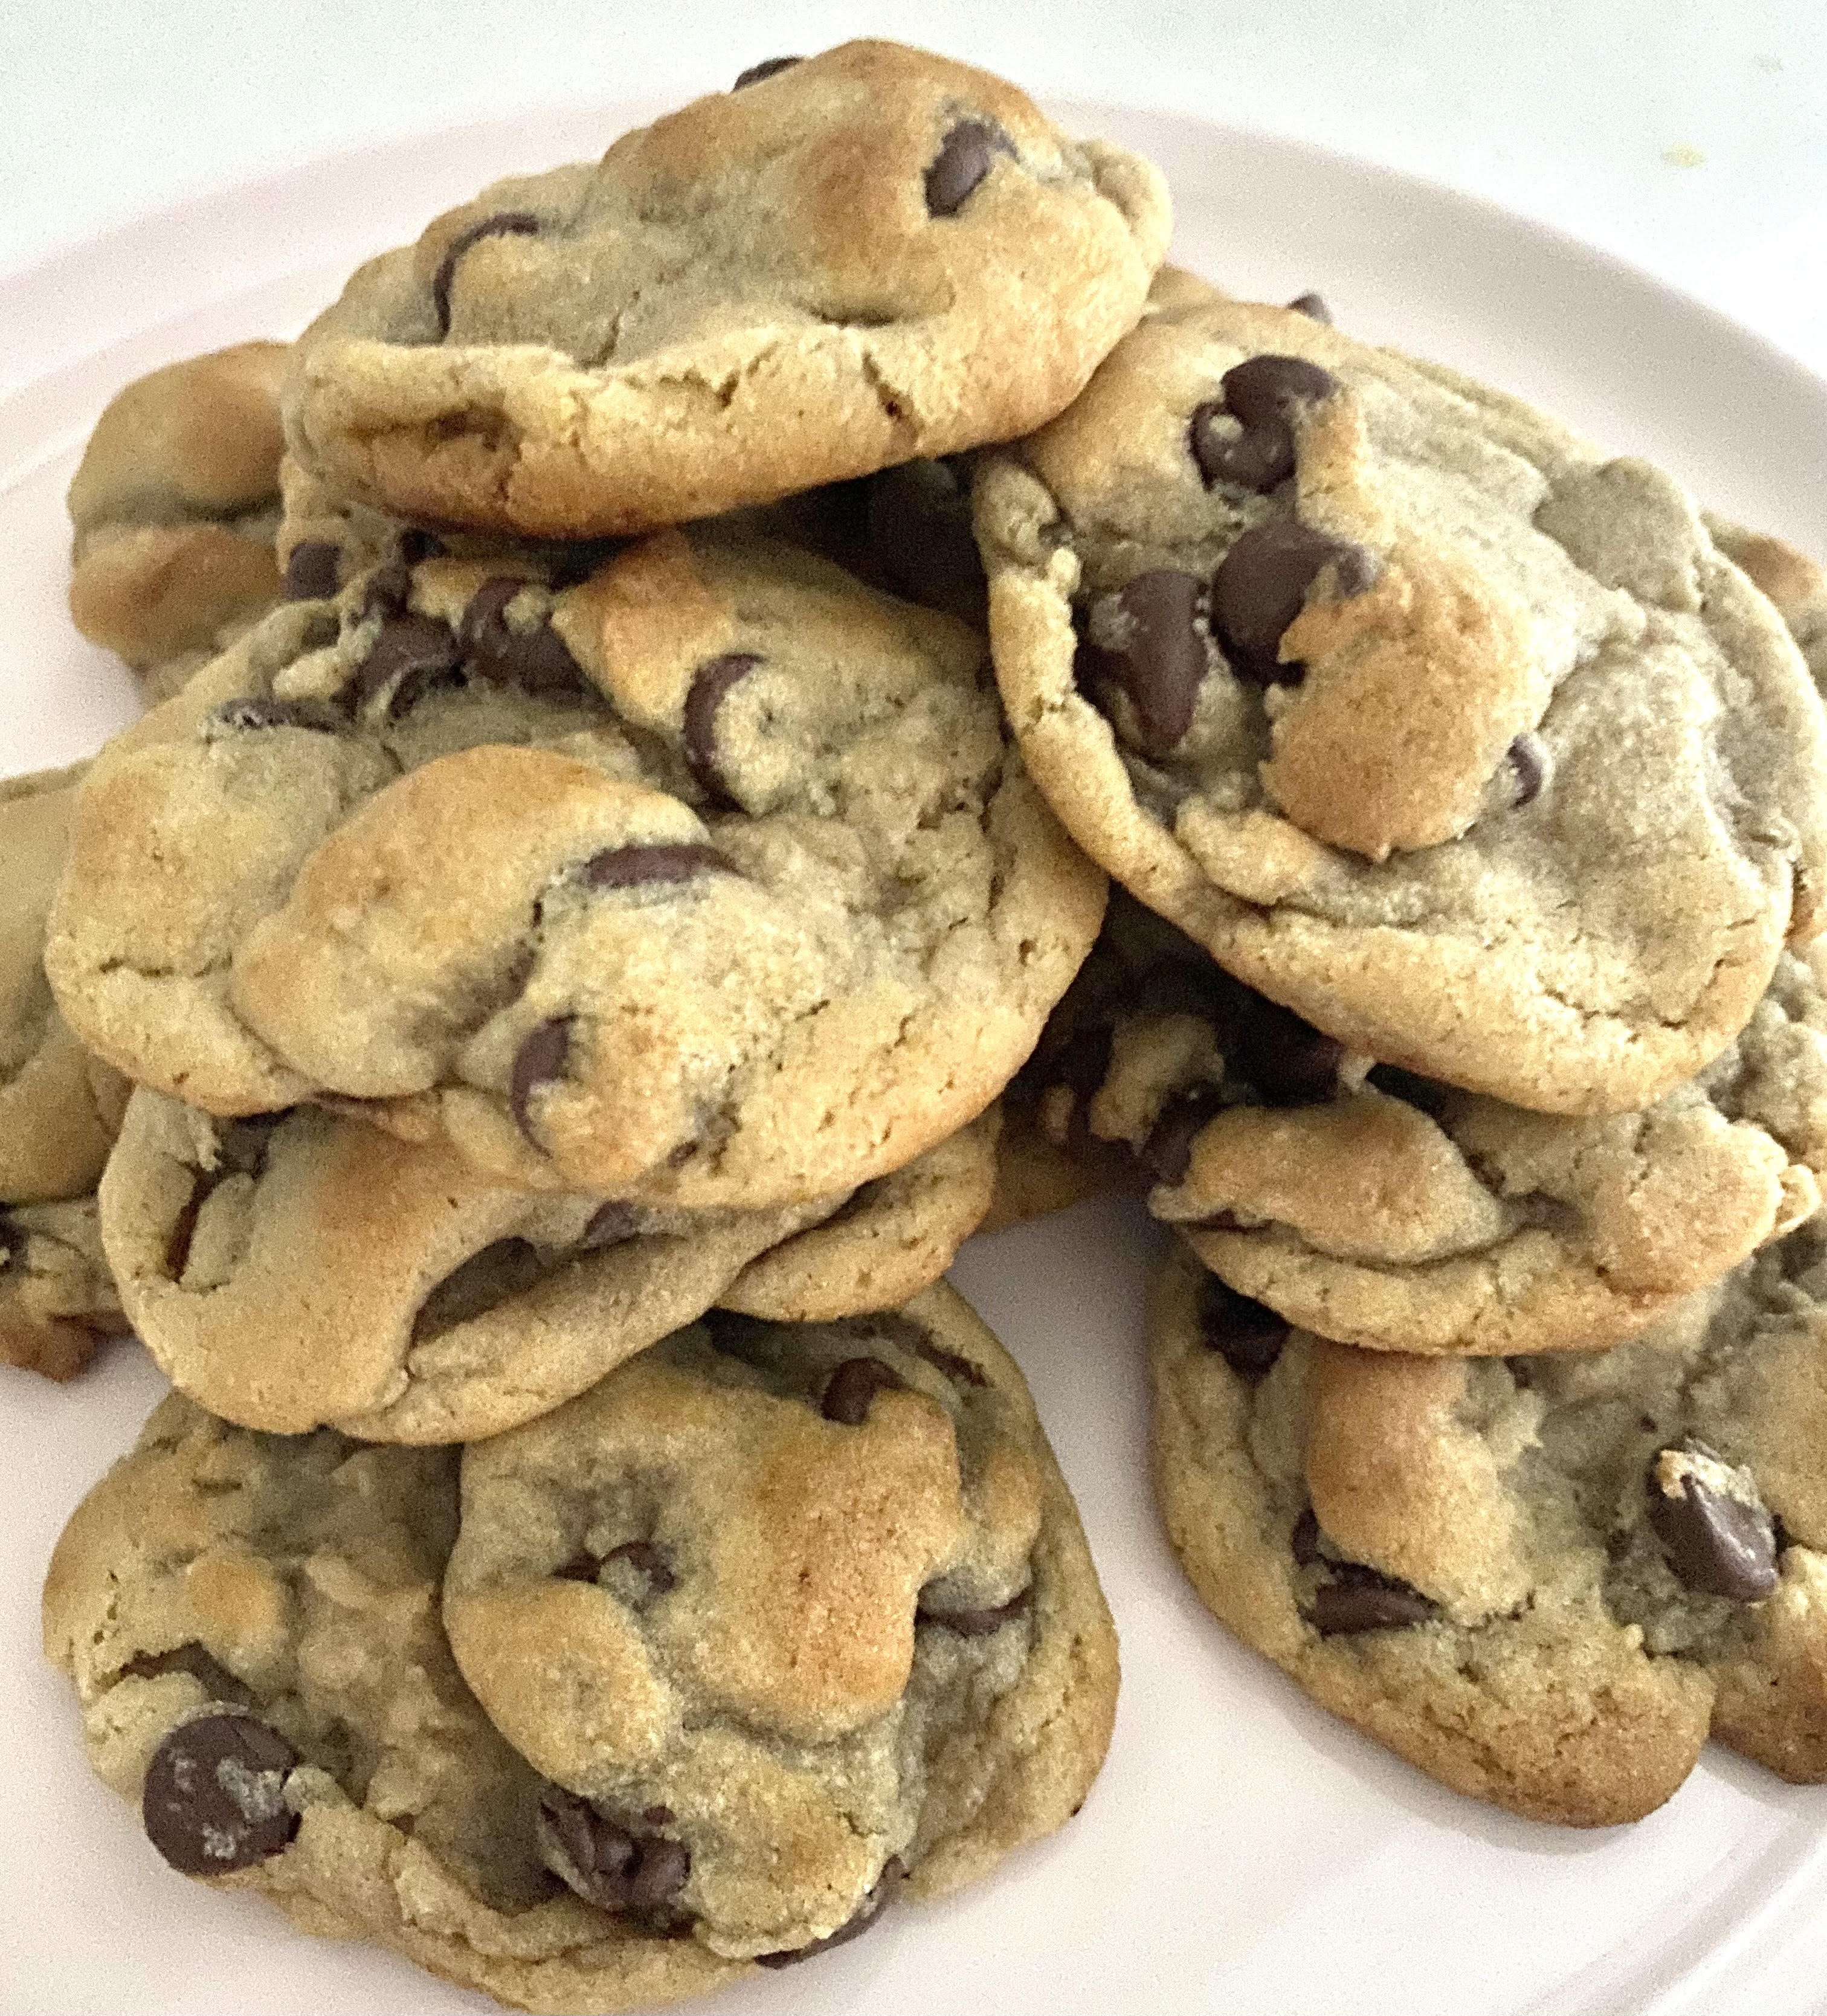 These chocolate chip cookies make the best soft cookies, no crispiness.